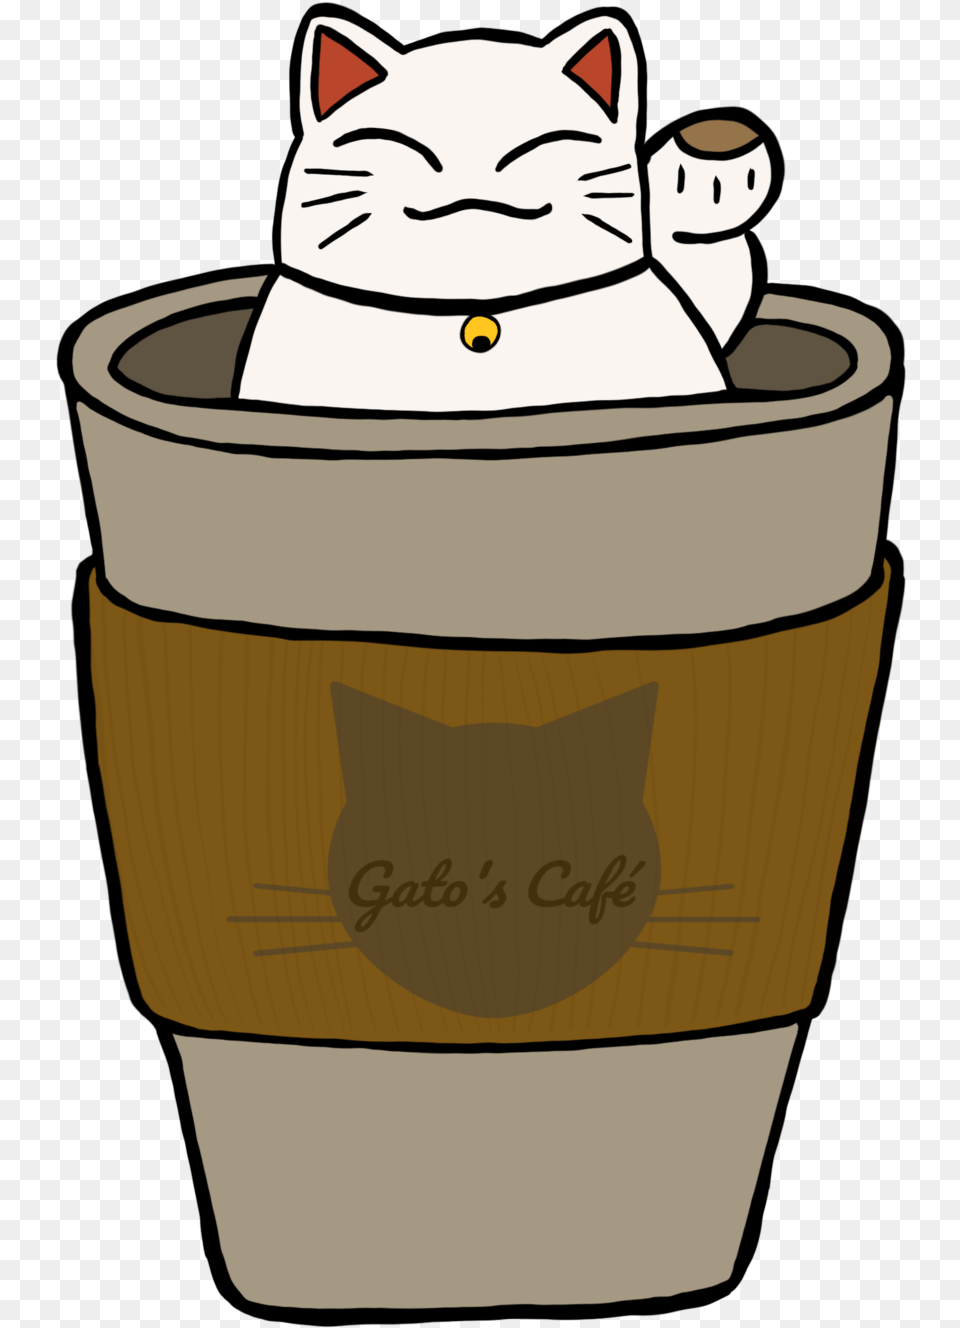 I Want Gato39s Caf To Be Somewhere You Can Disconnect Portable Network Graphics, Food, Cream, Dessert, Ice Cream Png